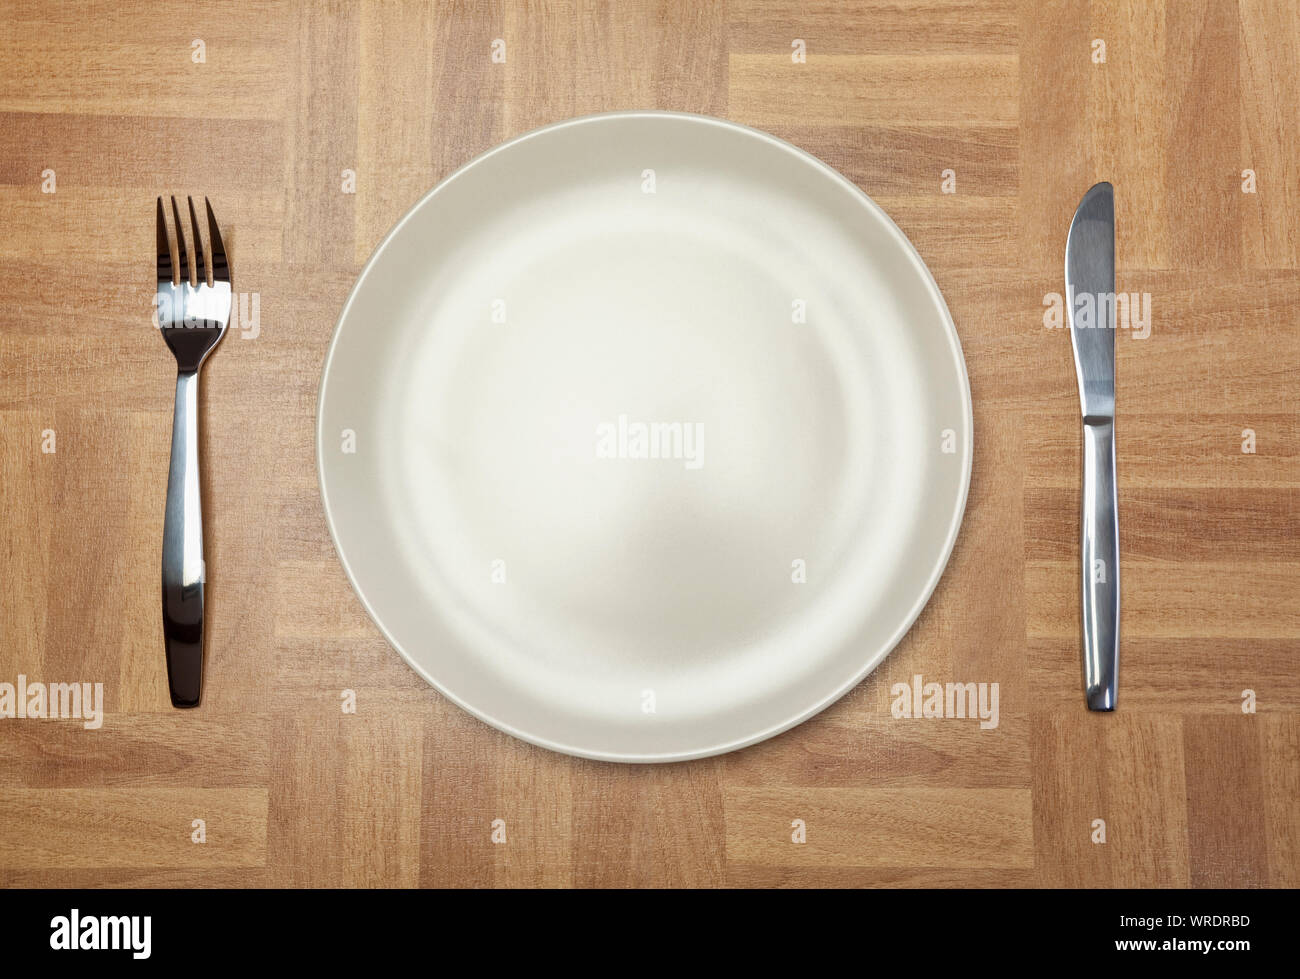 Place setting, white plate, knife and fork, from above on a wooden tabletop Stock Photo